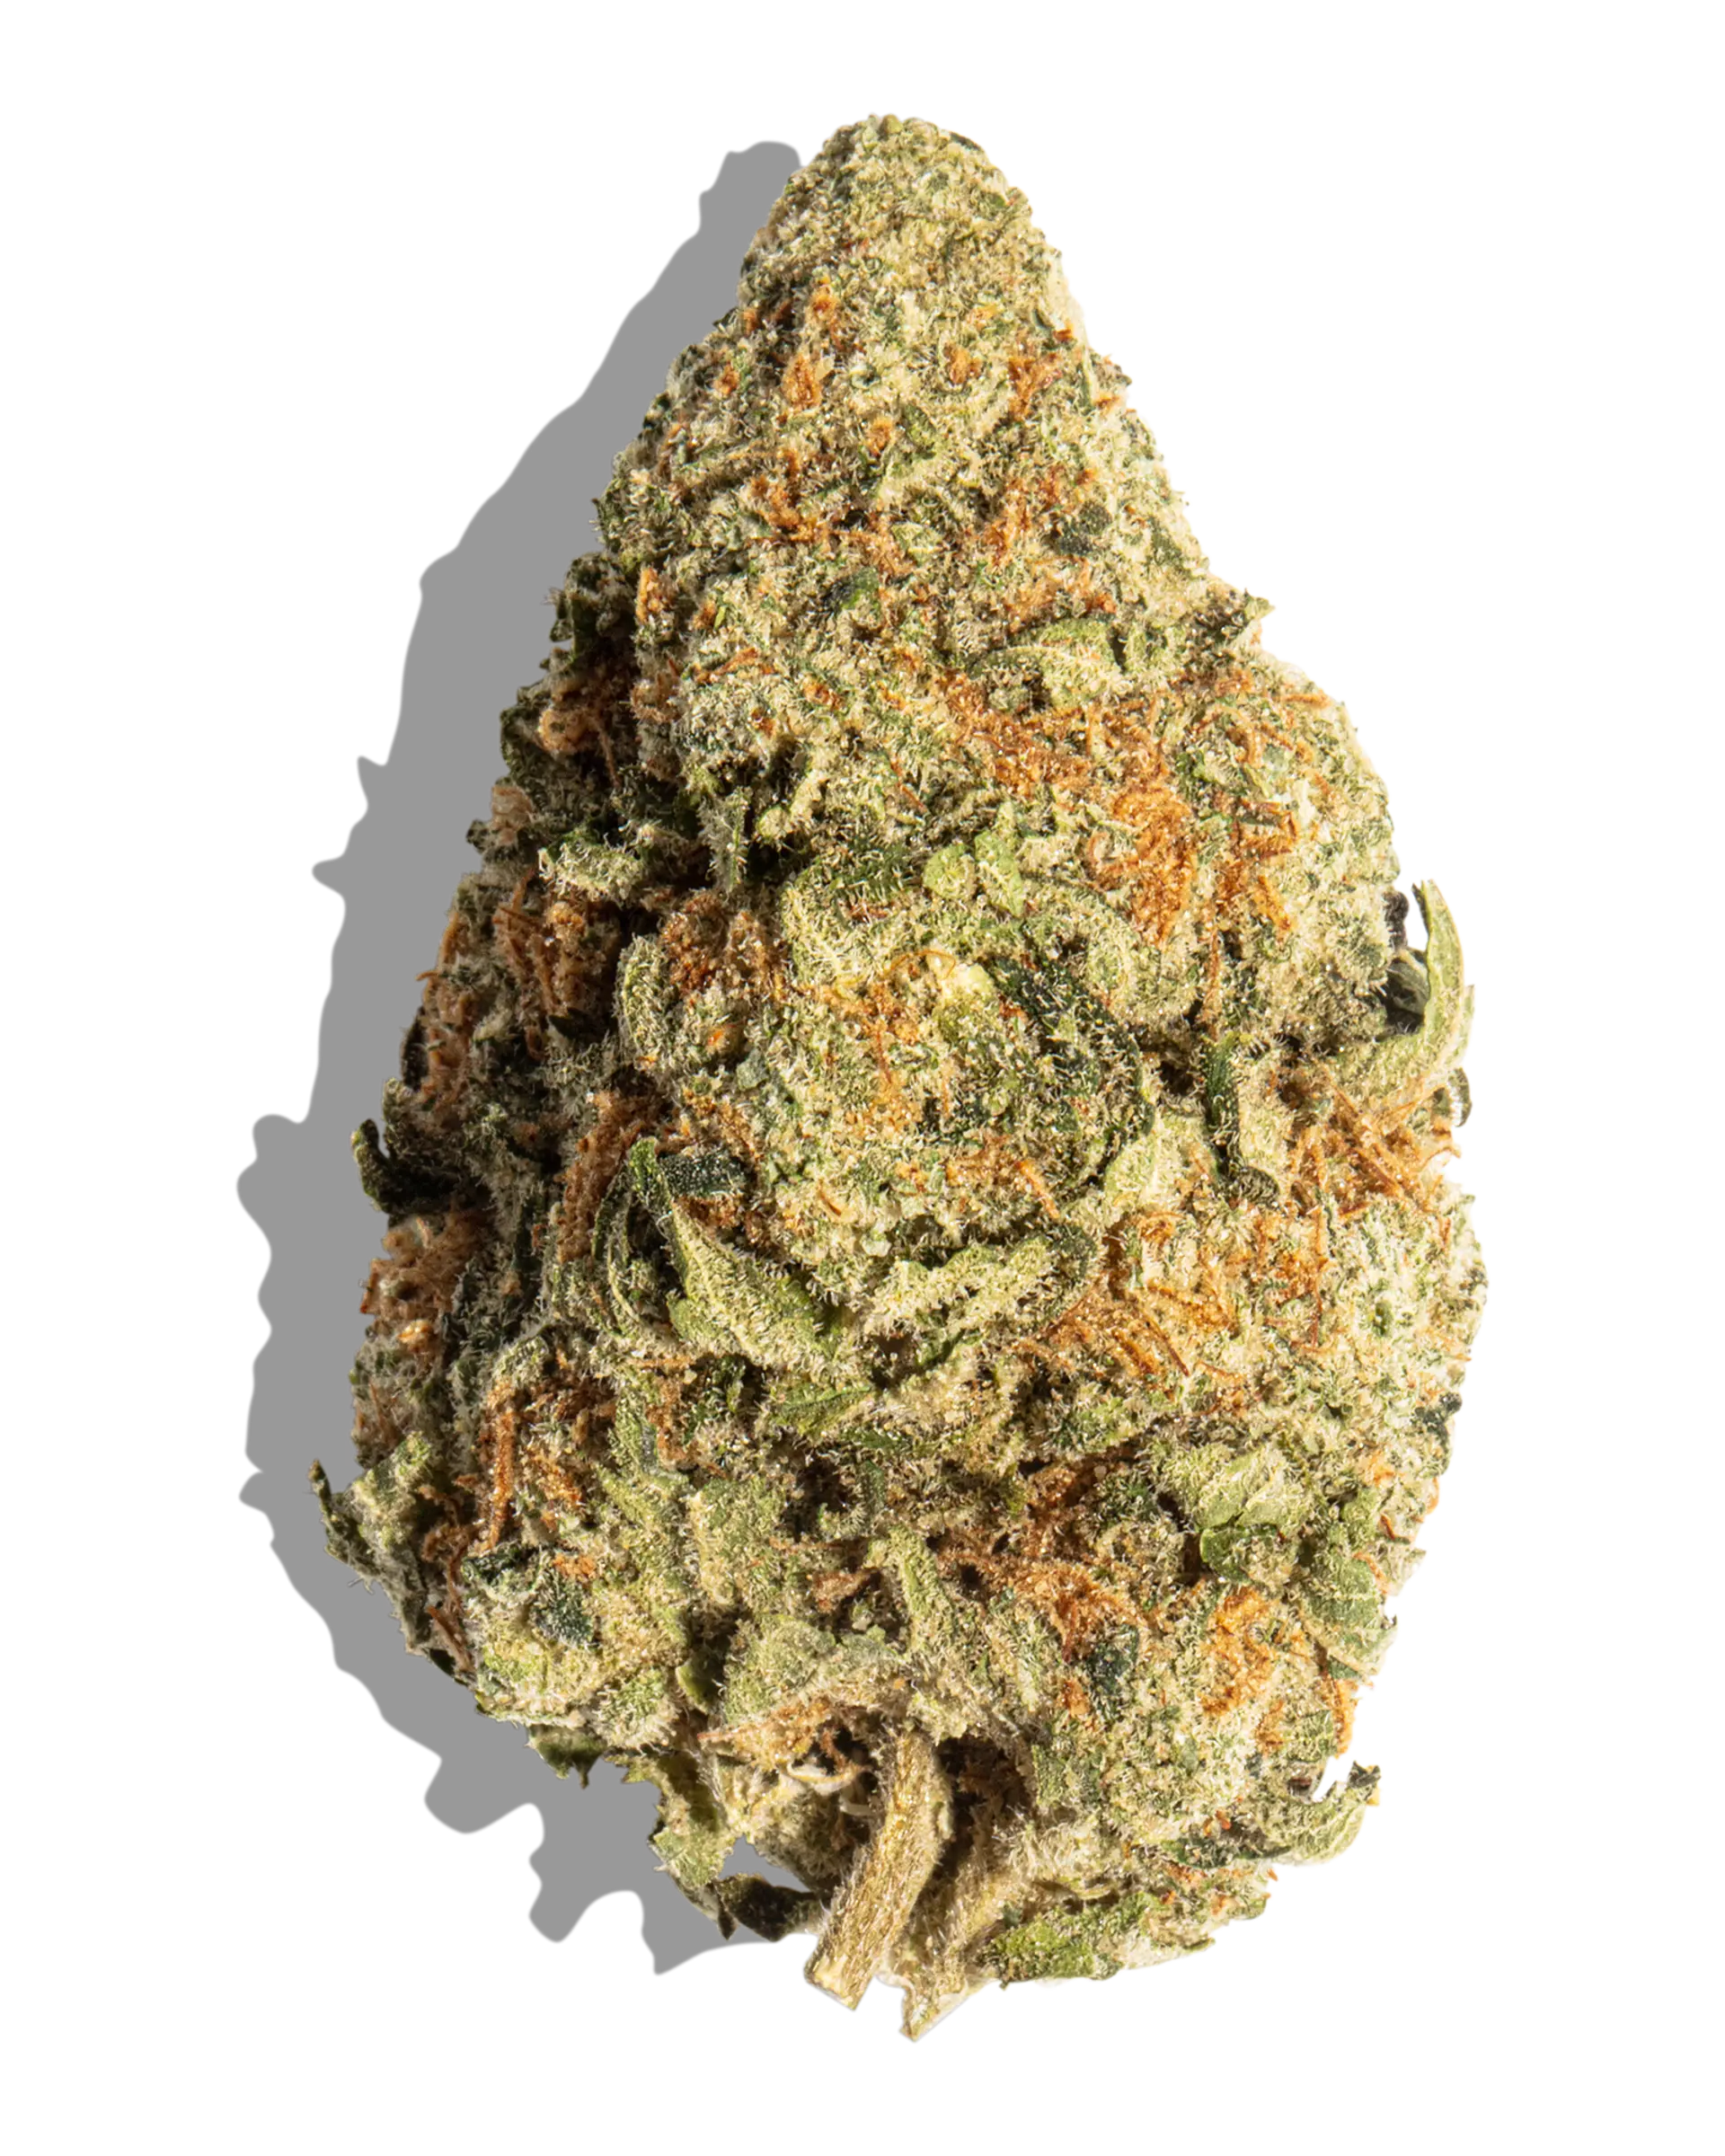 Pineapple Express Cultivator's Collection Flower, 1 of 1